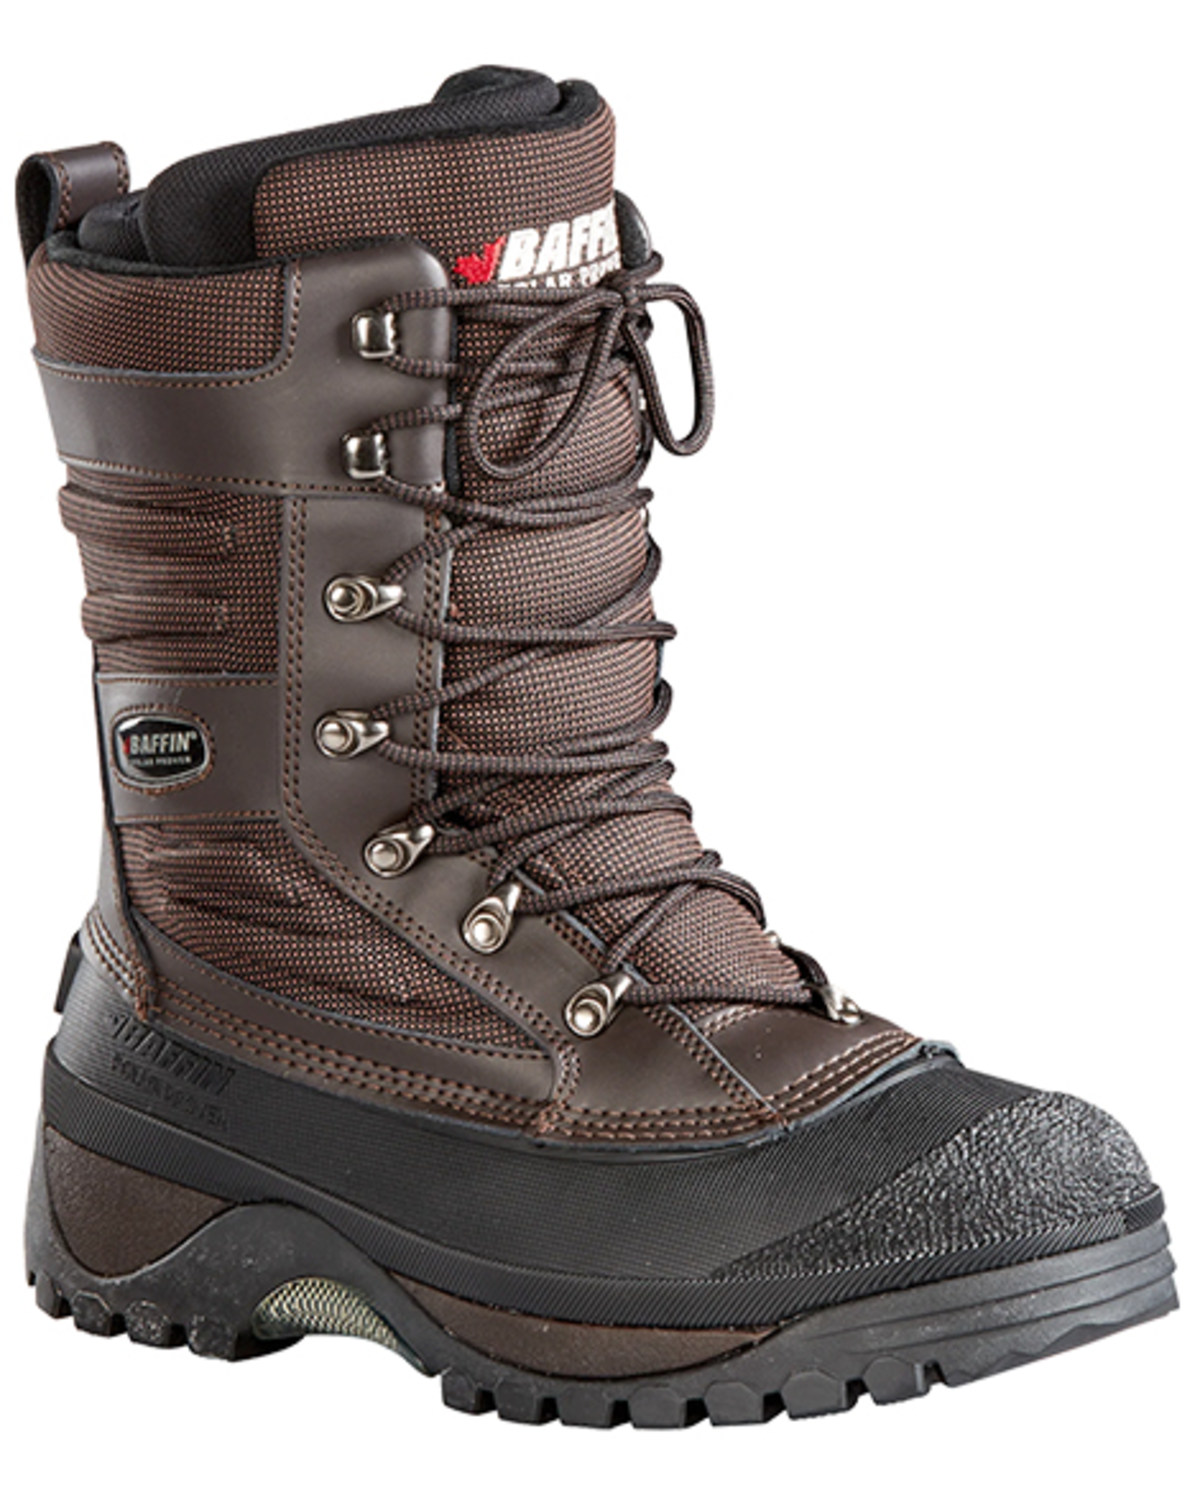 Baffin Men's Crossfire Waterproof Insulated Boots - Soft Toe